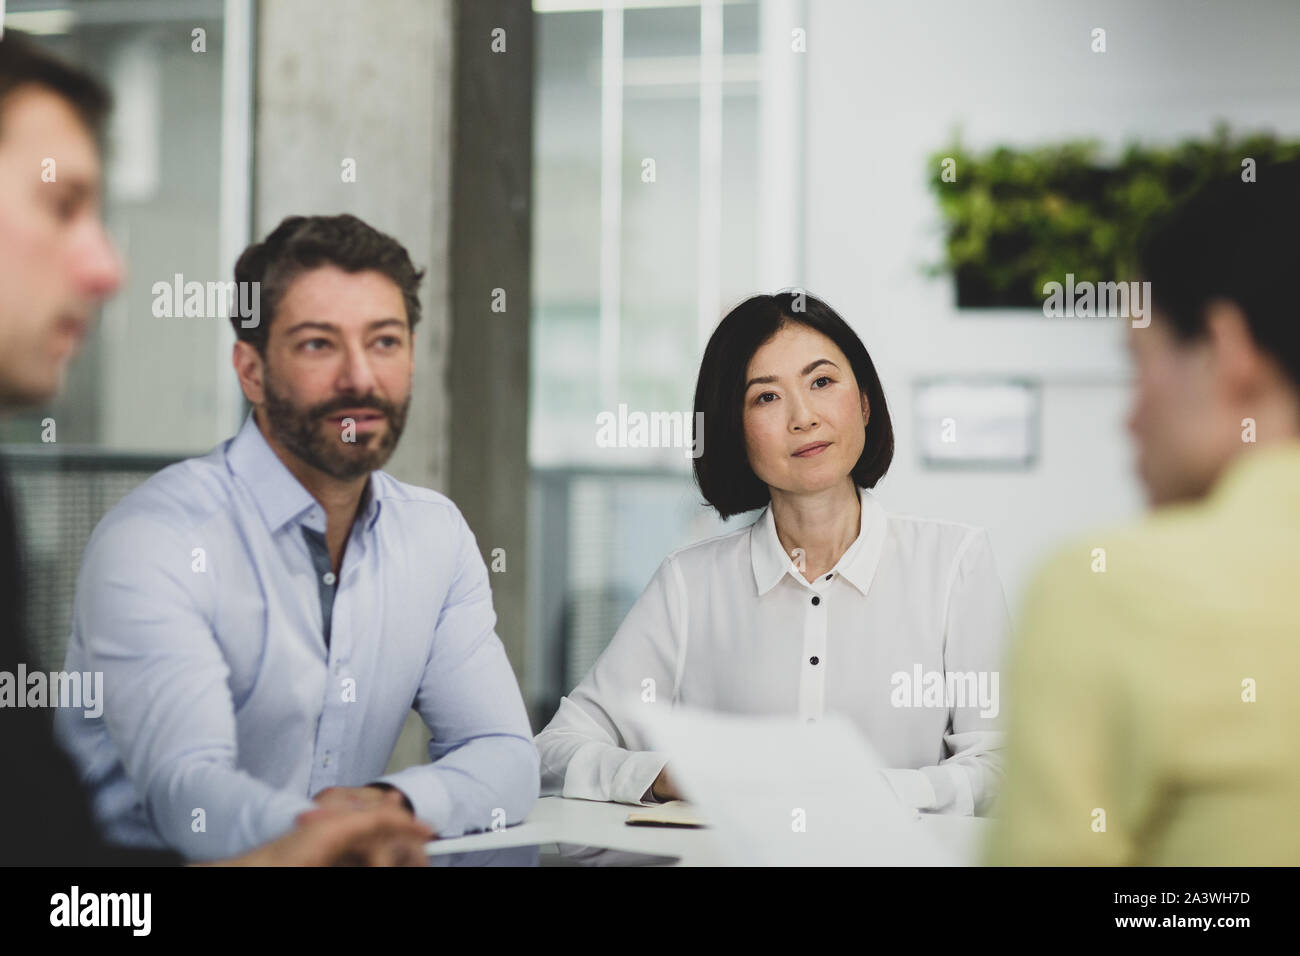 Corporate business executives listening in a board meeting Stock Photo